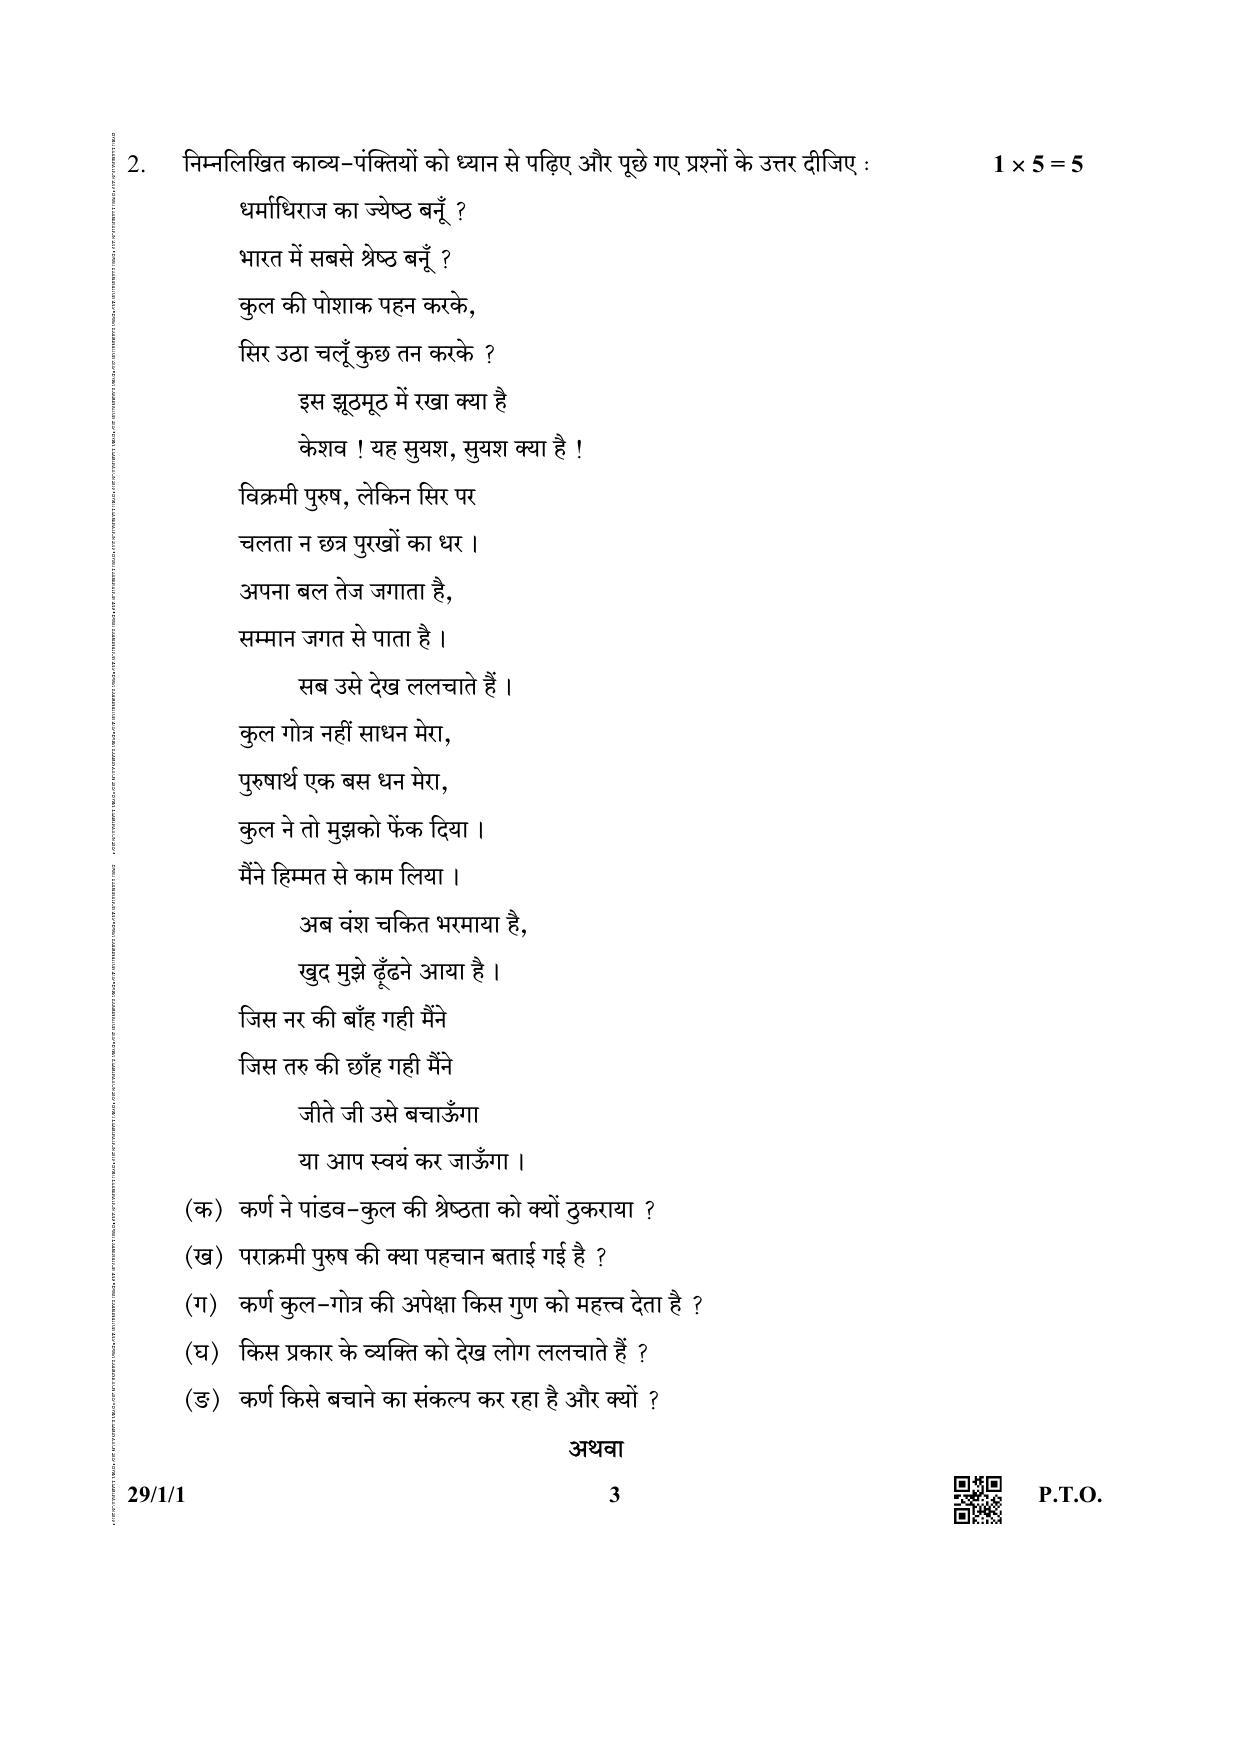 CBSE Class 12 29-1-1 (Hindi ELECTIVE) 2019 Question Paper - Page 3